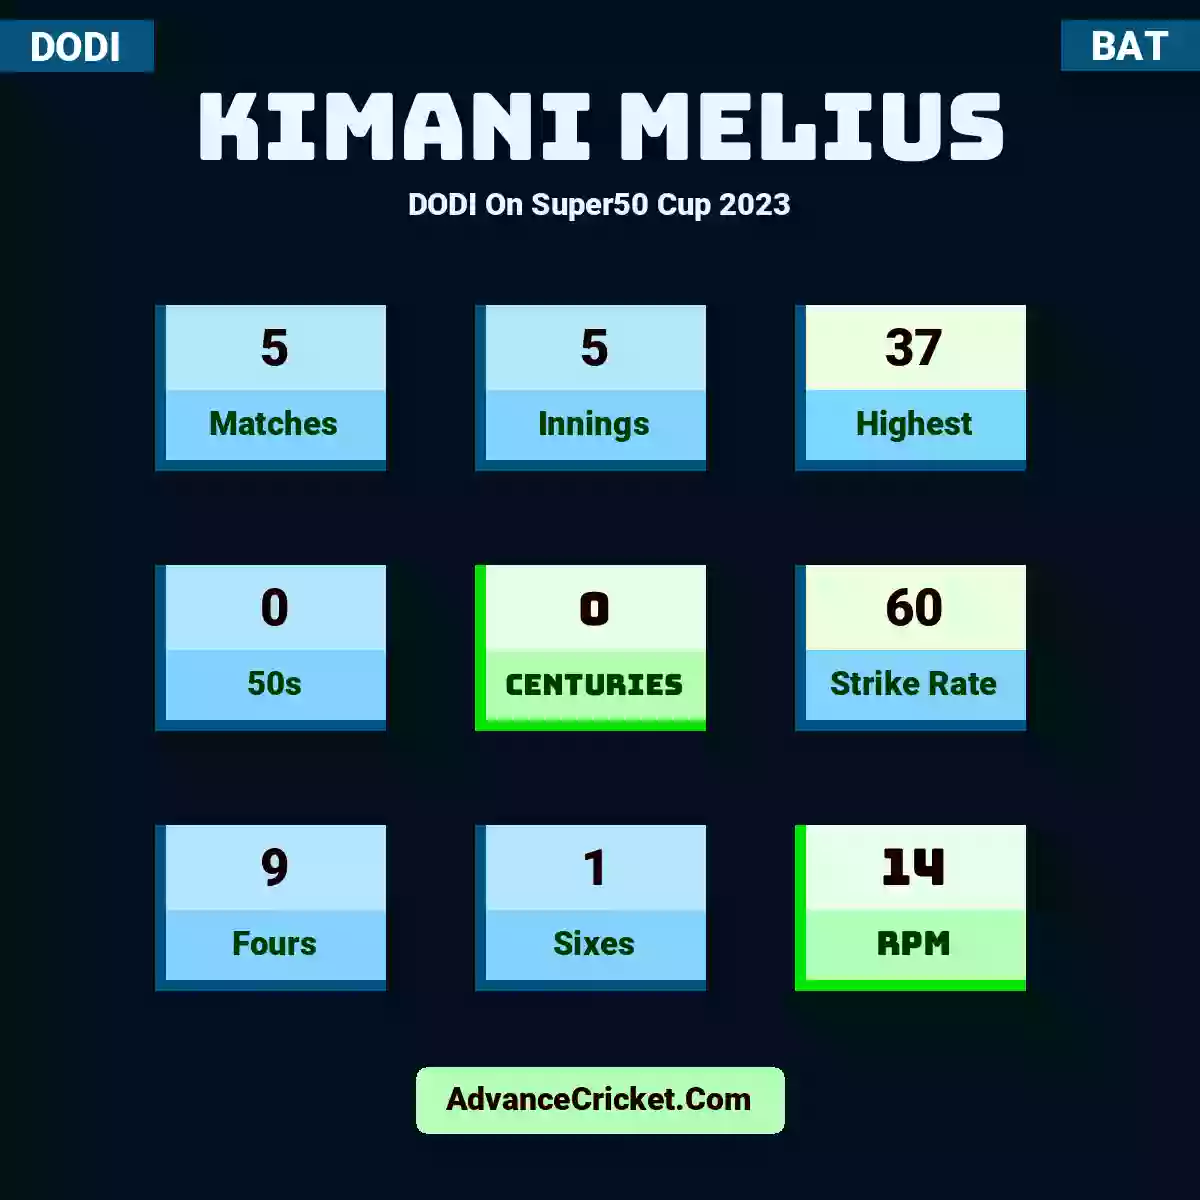 Kimani Melius DODI  On Super50 Cup 2023, Kimani Melius played 5 matches, scored 37 runs as highest, 0 half-centuries, and 0 centuries, with a strike rate of 60. K.Melius hit 9 fours and 1 sixes, with an RPM of 14.